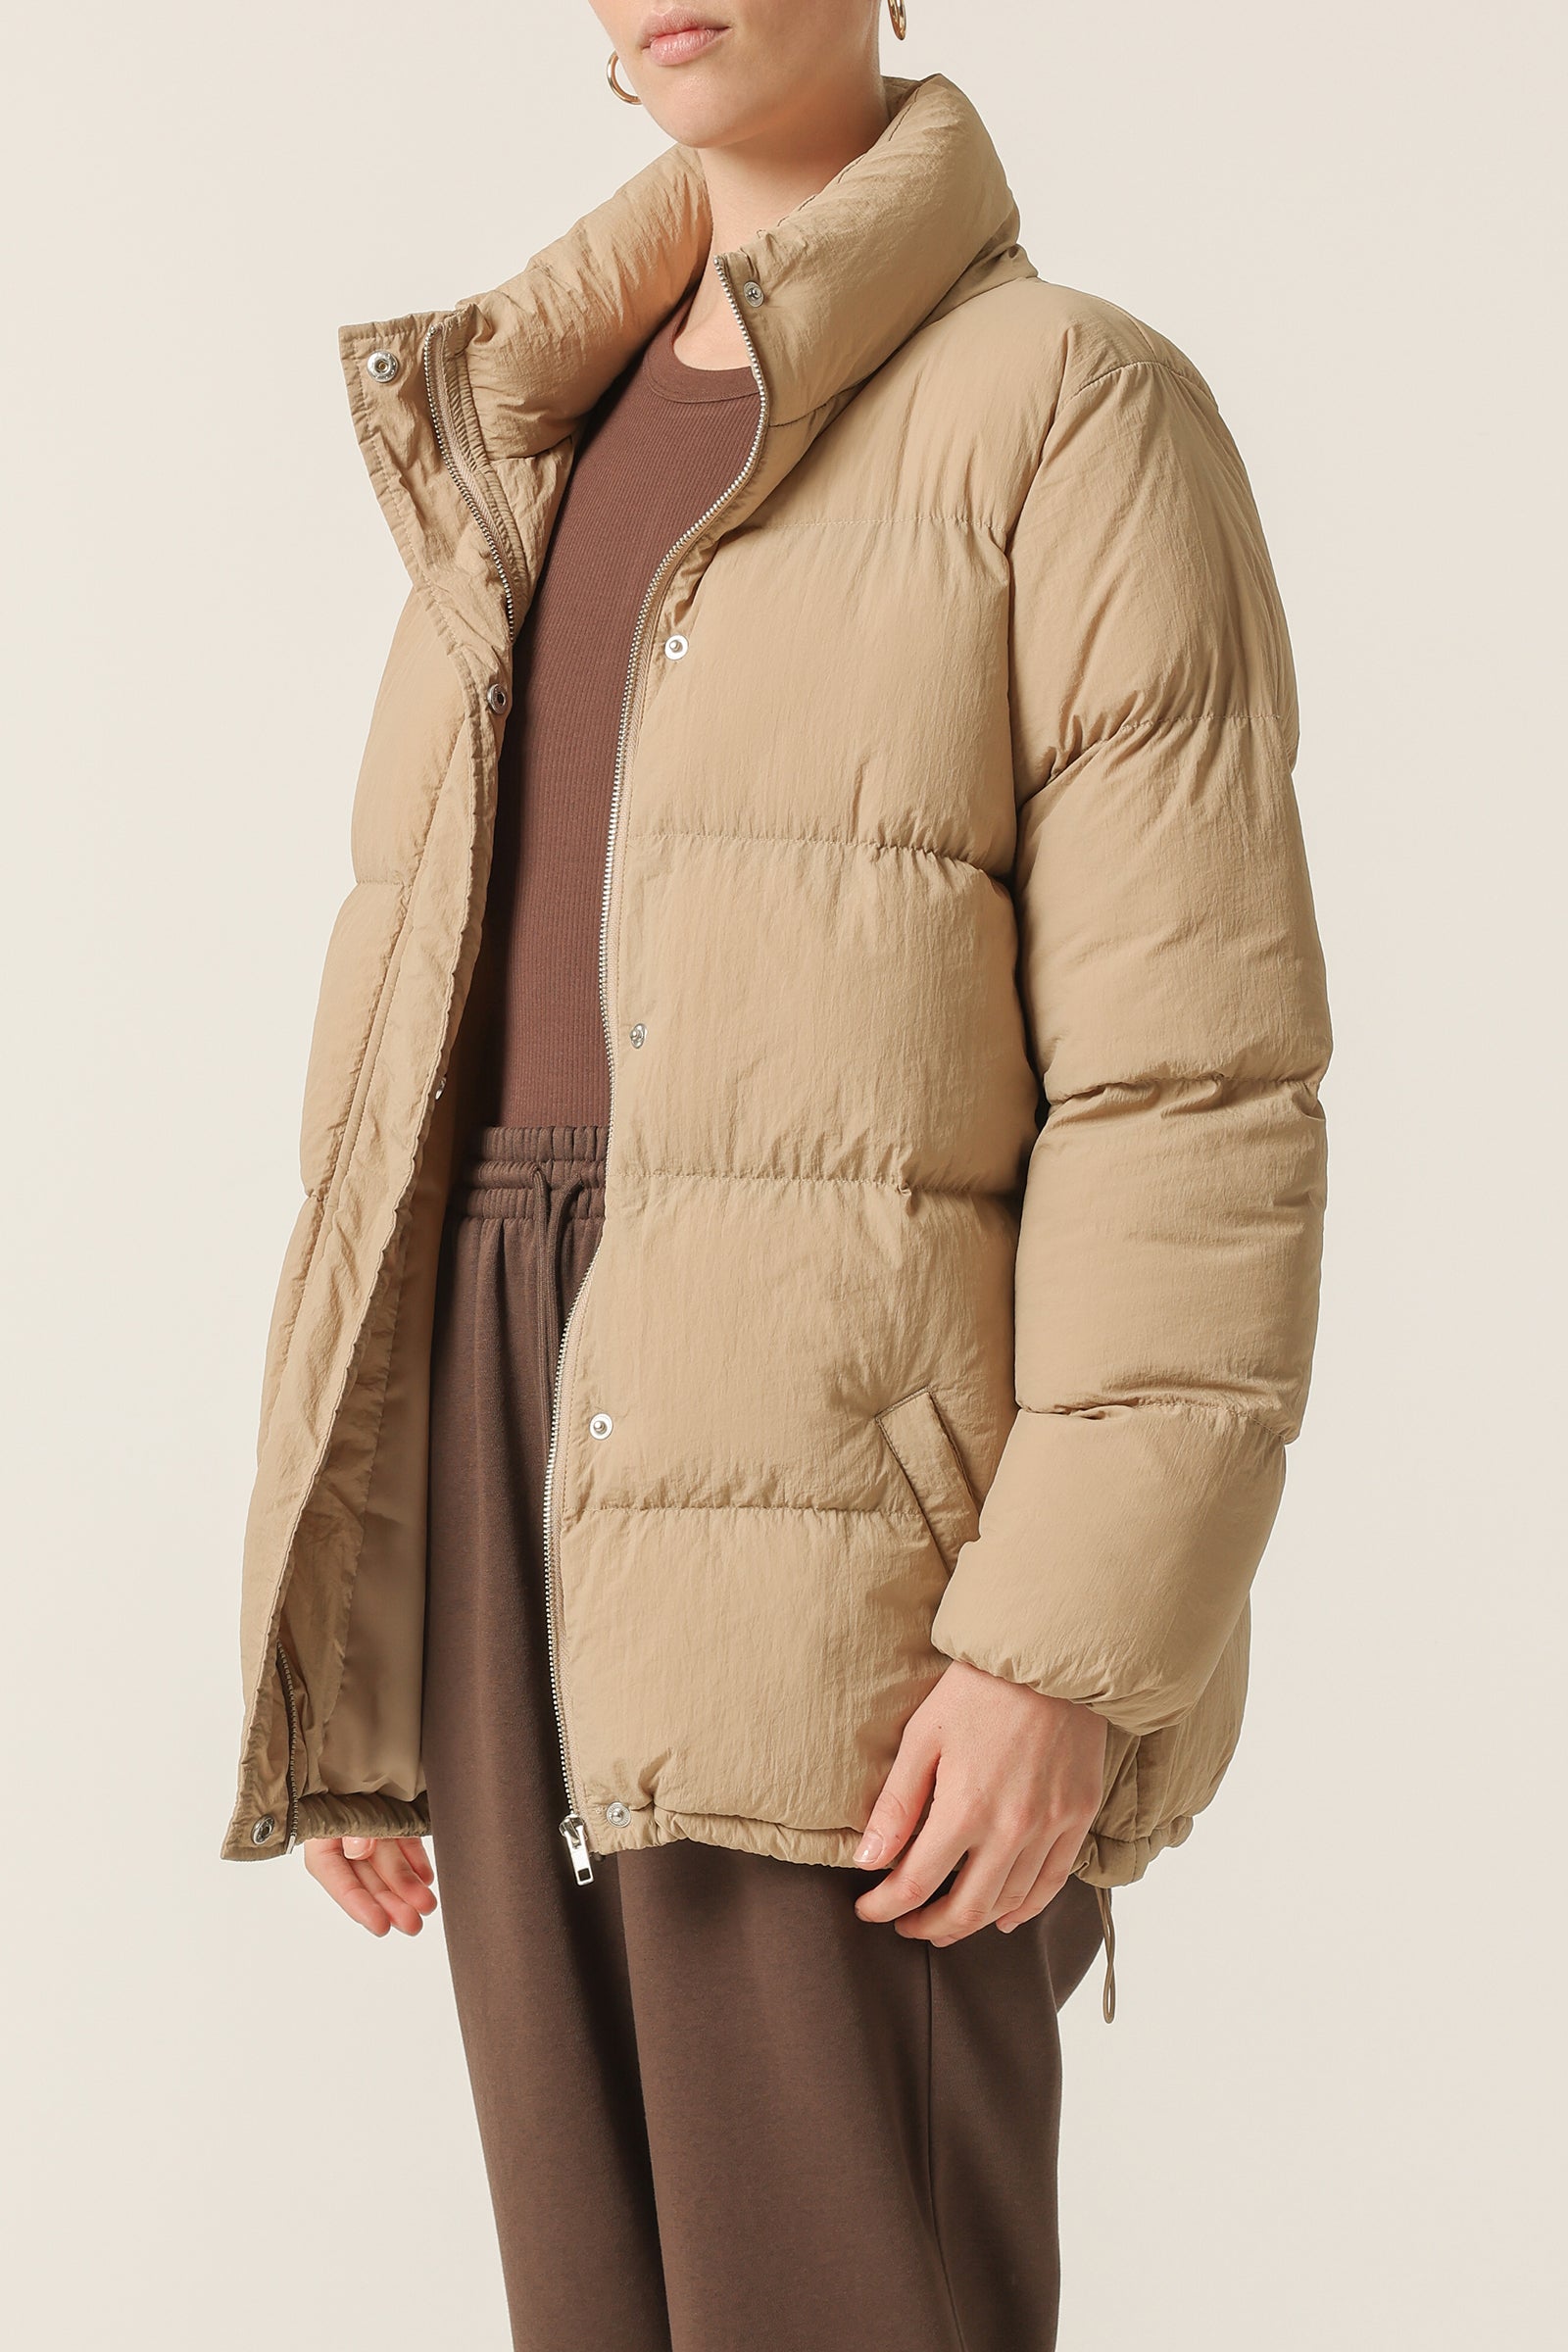 Nude Lucy Topher Longline Puffer In A Beige Sepia Colour 